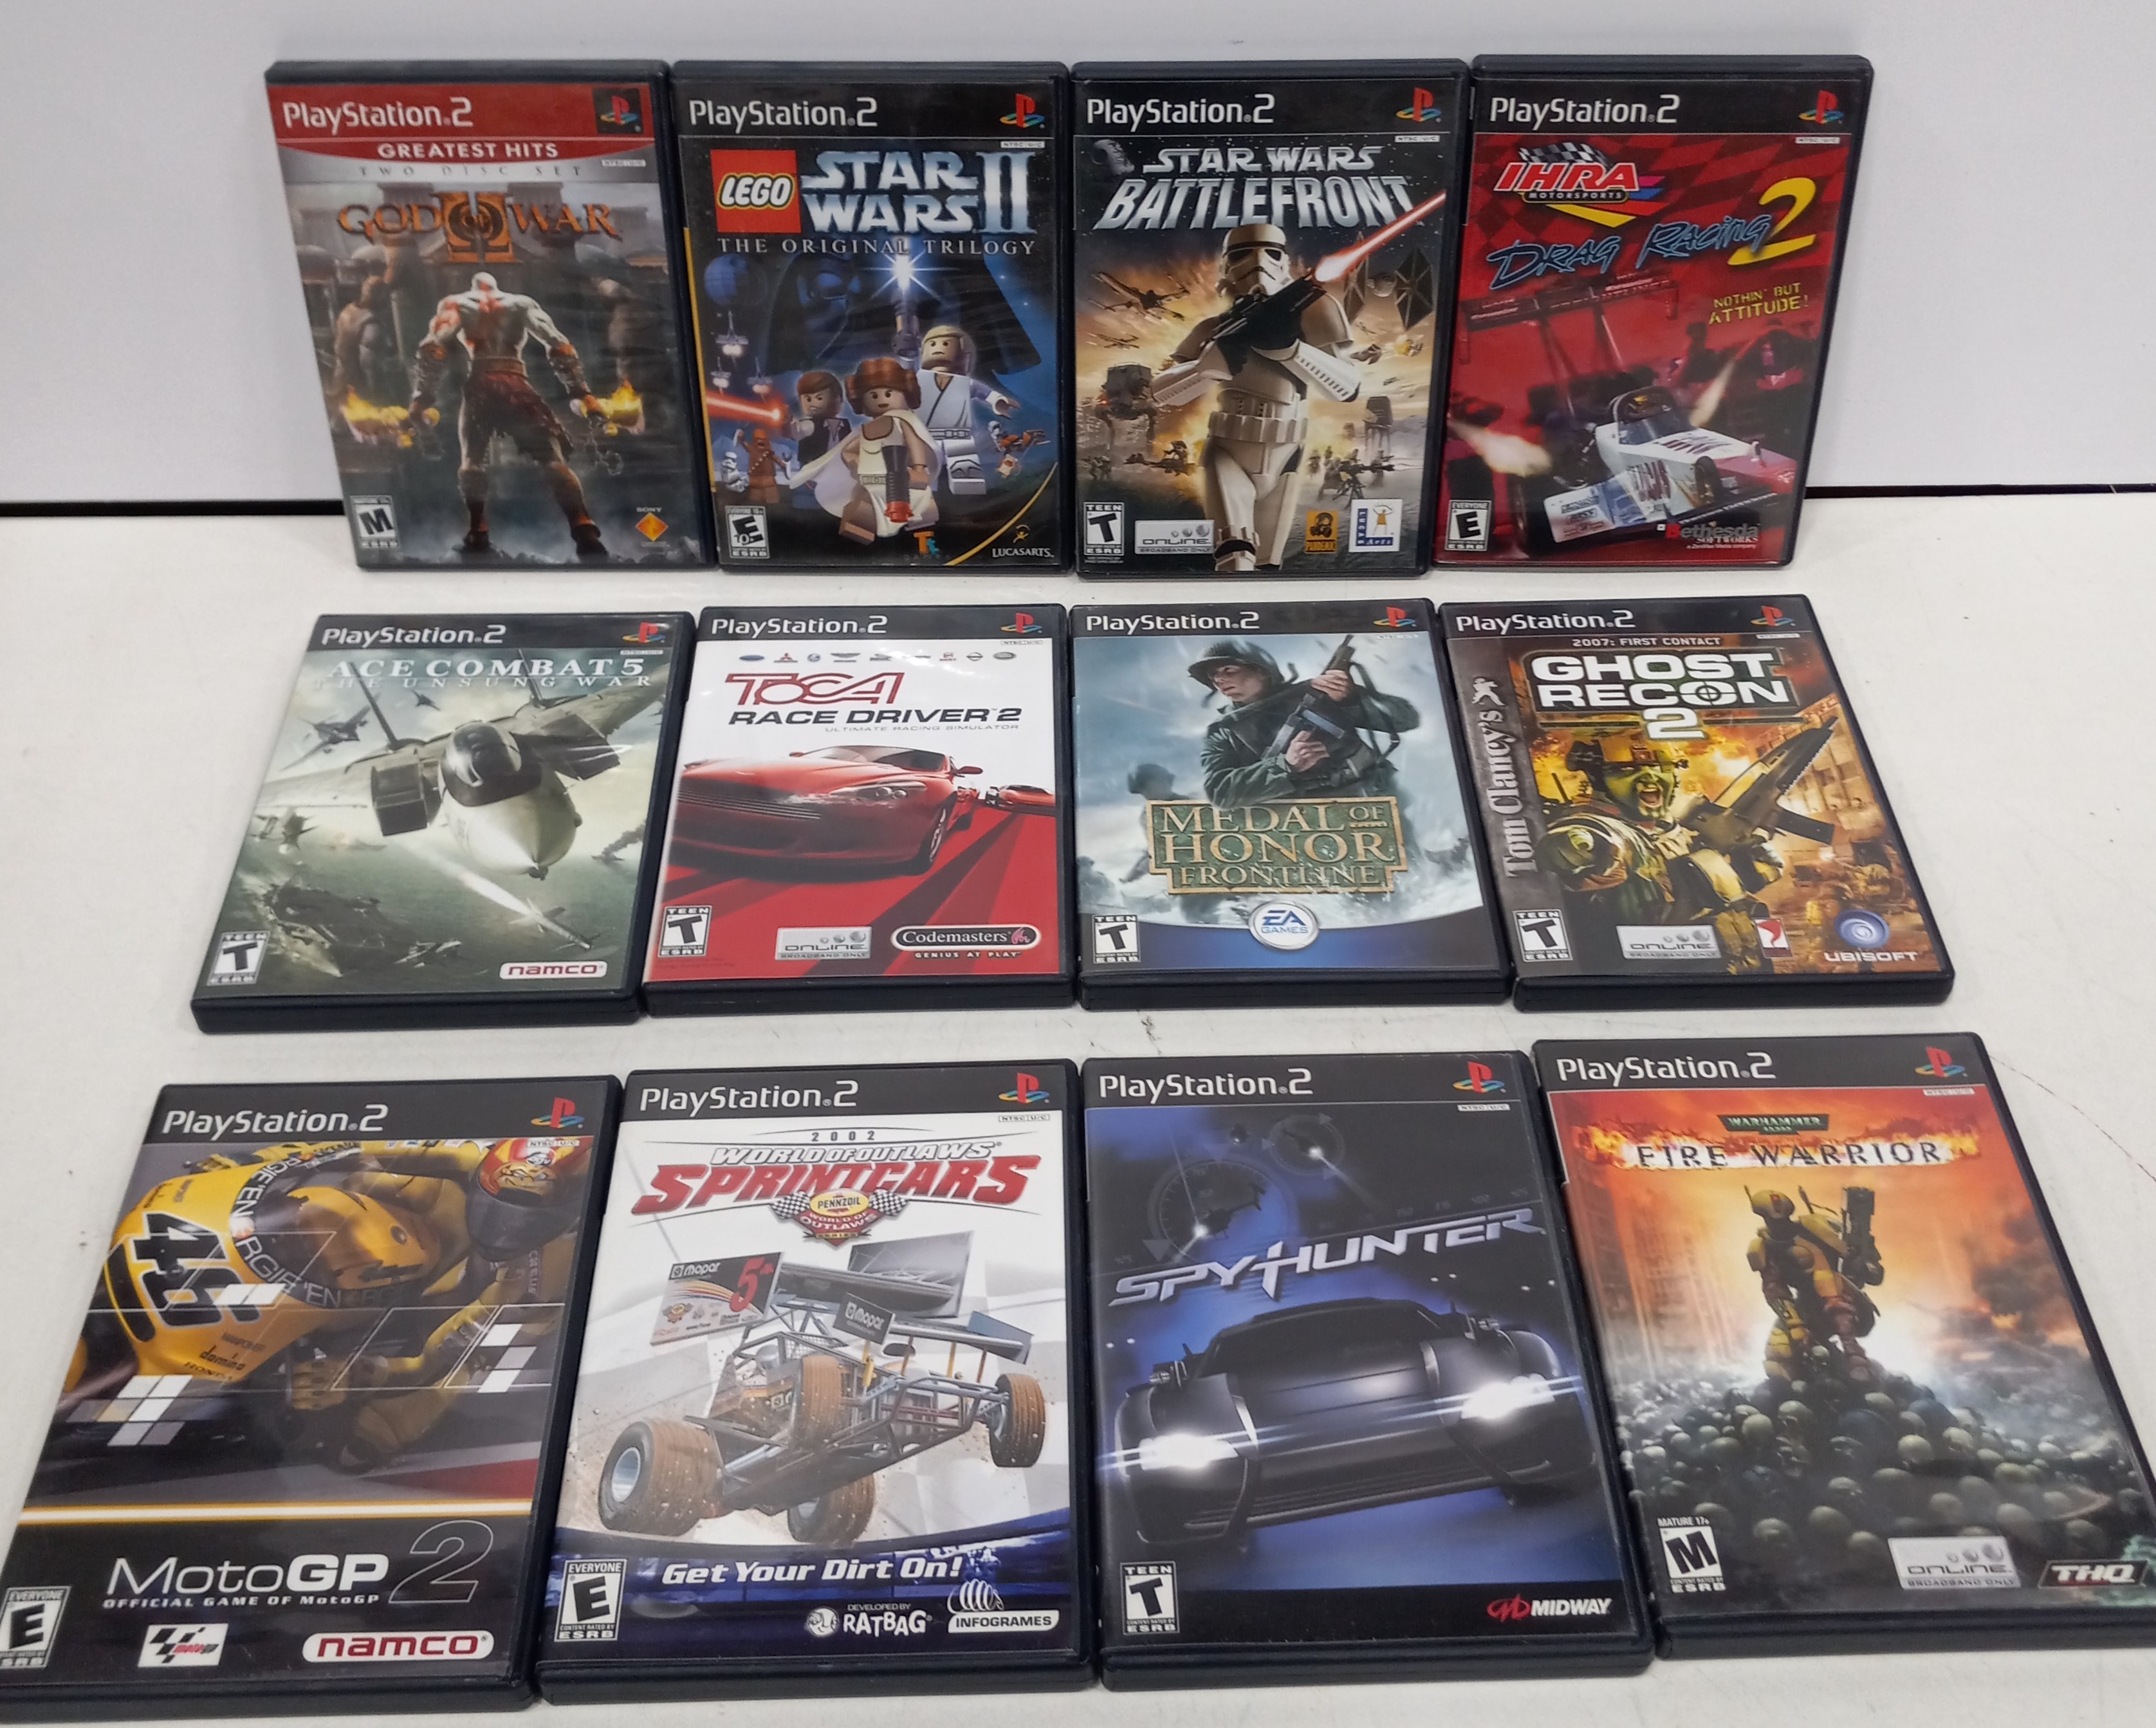 ps2 games list